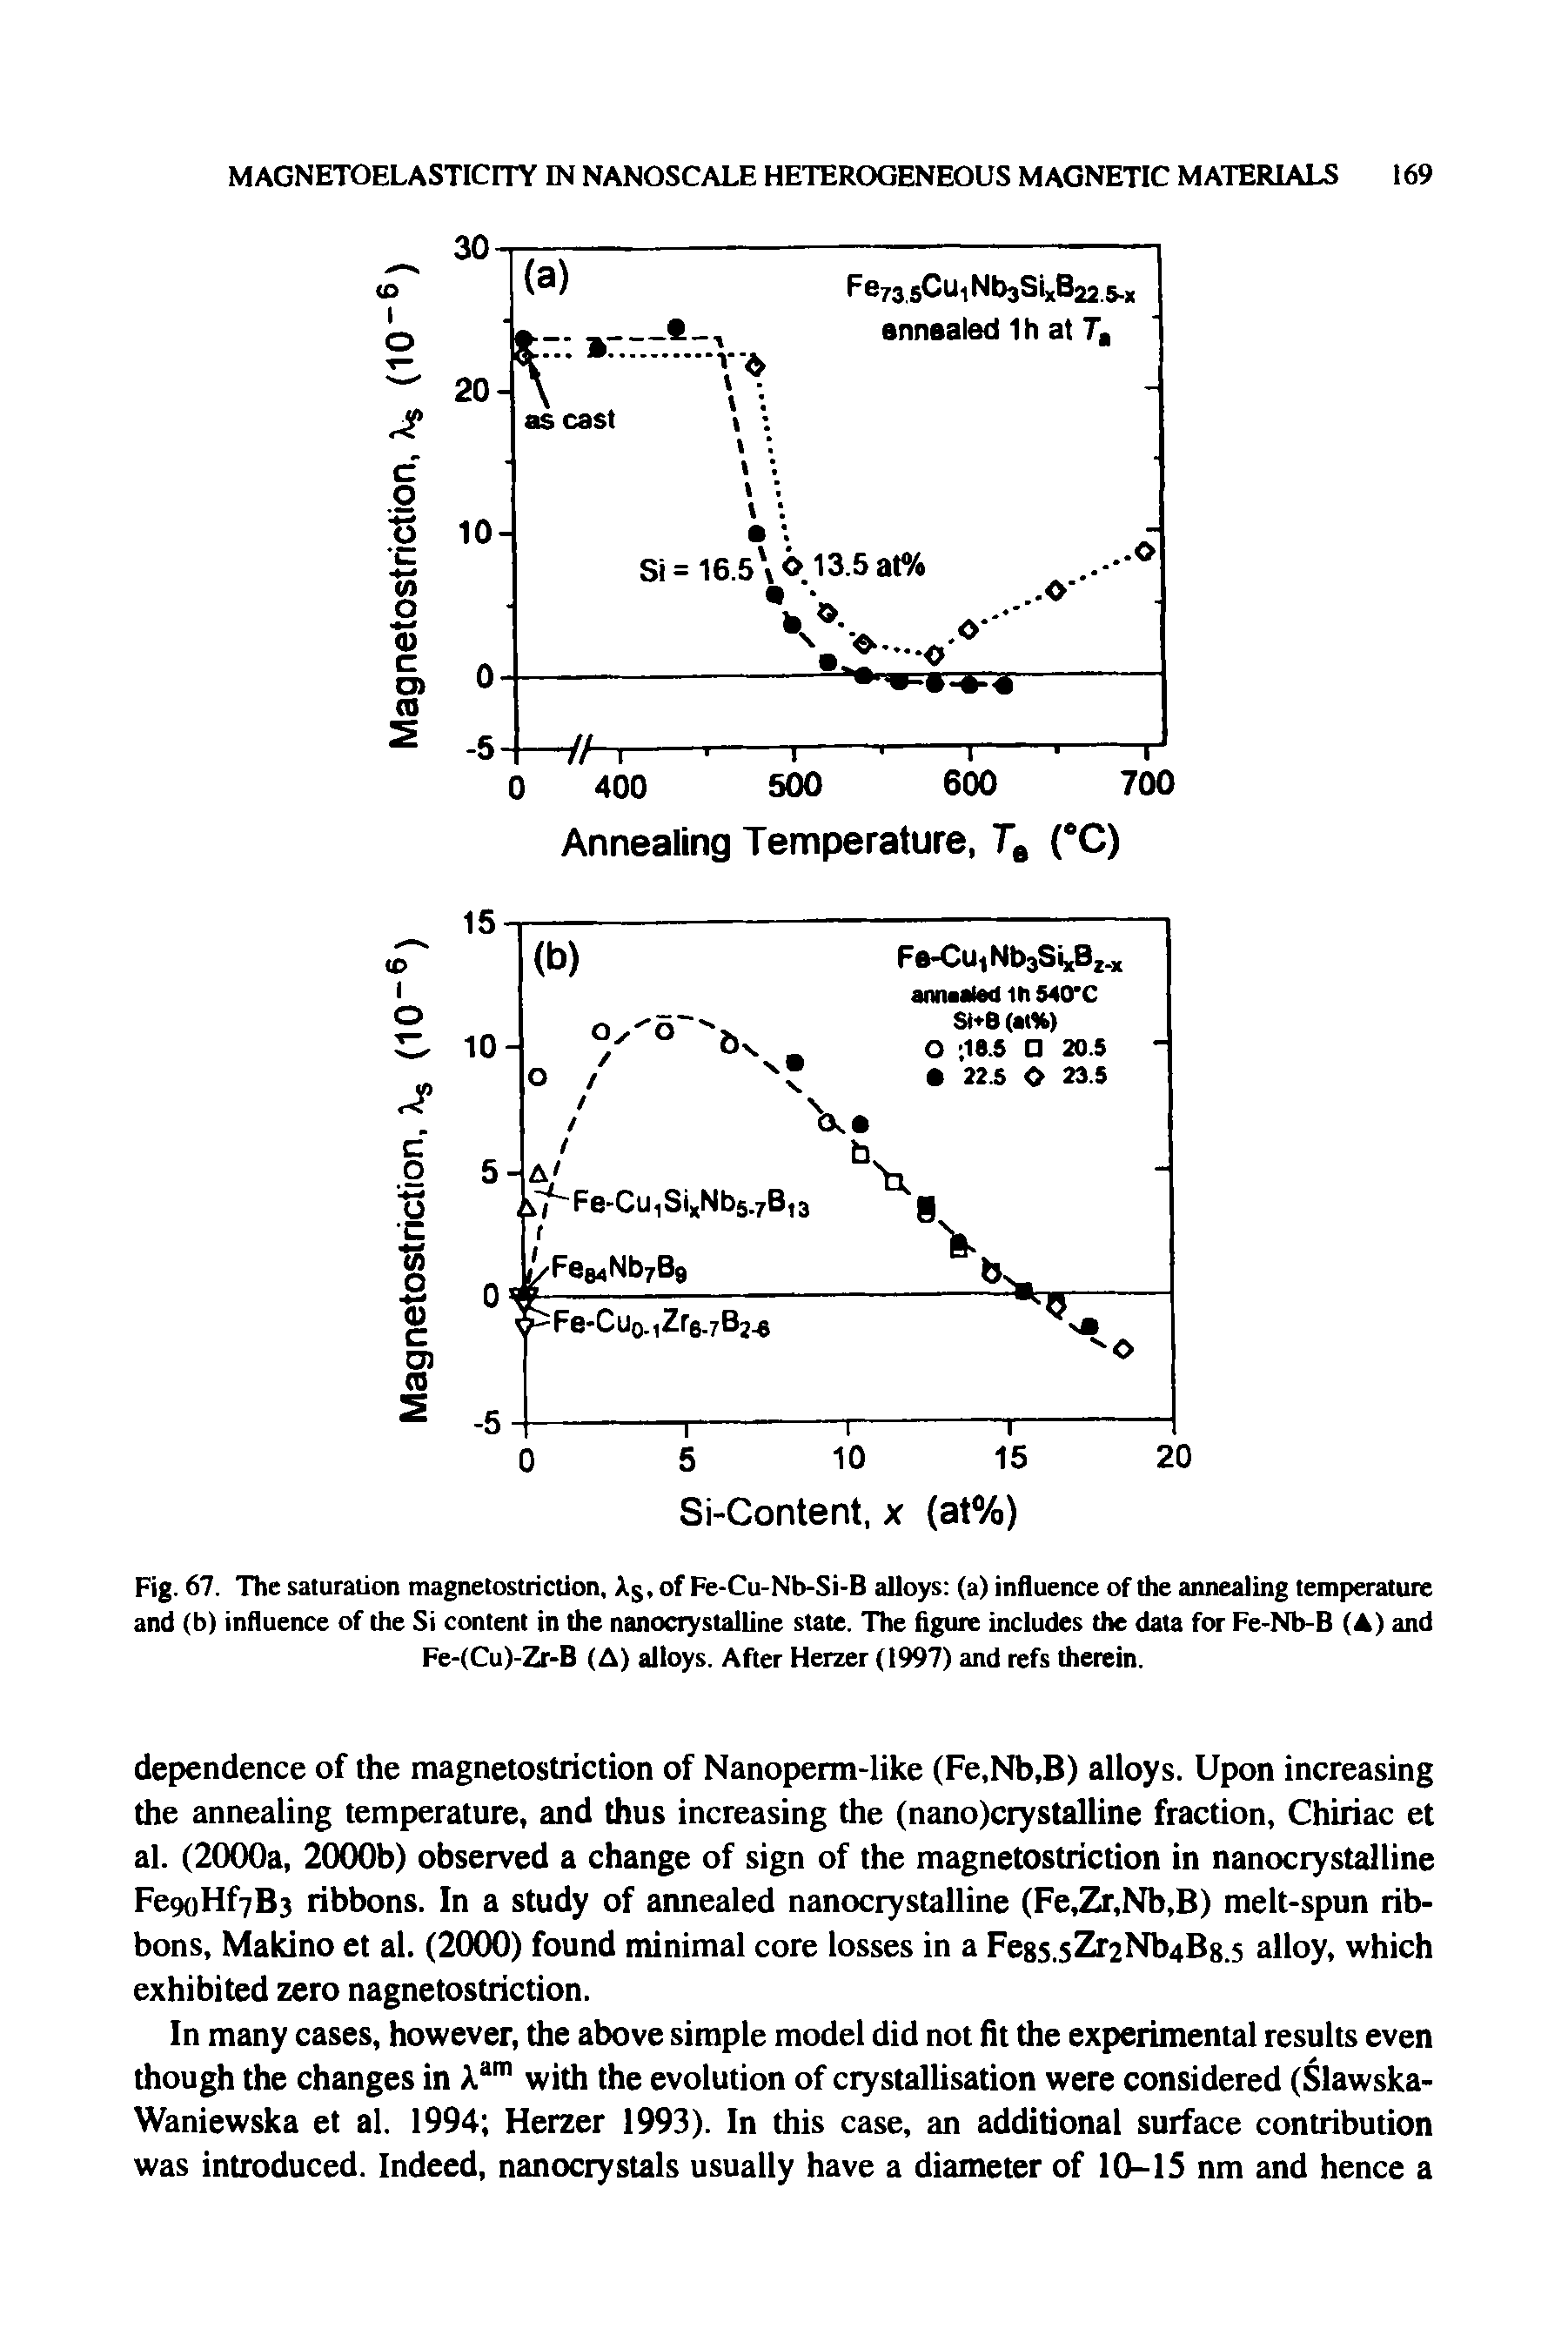 Fig. 67. The saturation magnetostriction, Ag, of Fe-Cu-Nb-Si-B alloys (a) influence of the annealing temperature and (b) influence of the Si content in the nanocrystalline state. The figure includes the data for Fe-Nb-B (A) and Fe-(Cu)-Zr-B (A) alloys. After Herzer (1997) and refs therein.